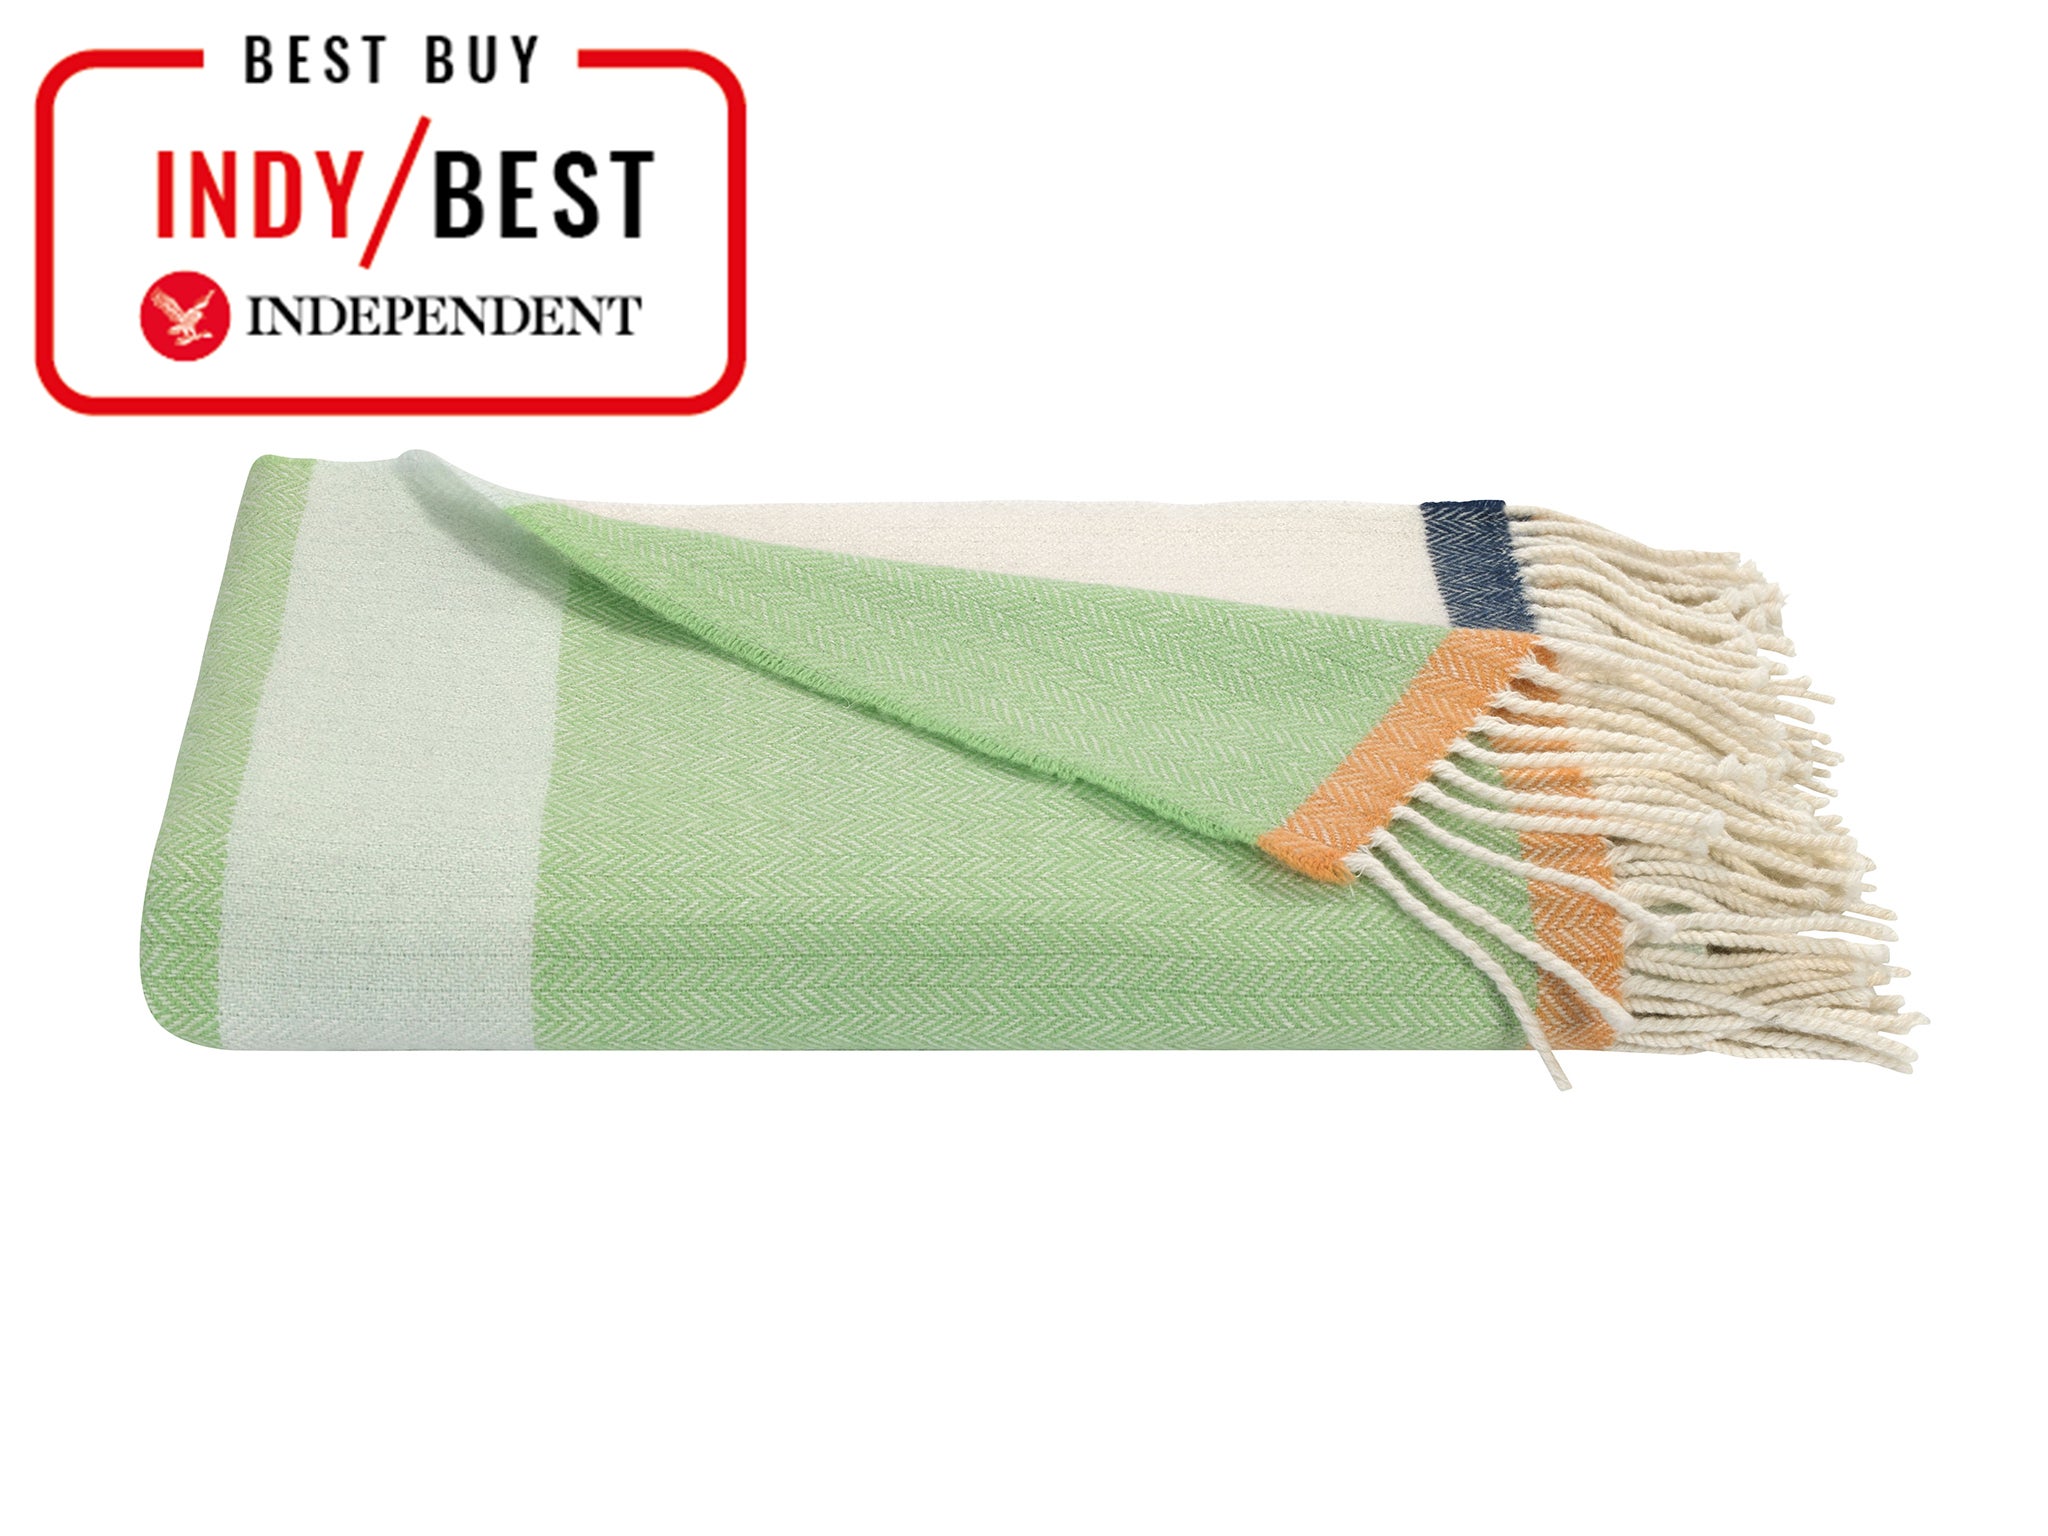 Best wool blanket 2020: Merino and chunky knit throw | The Independent